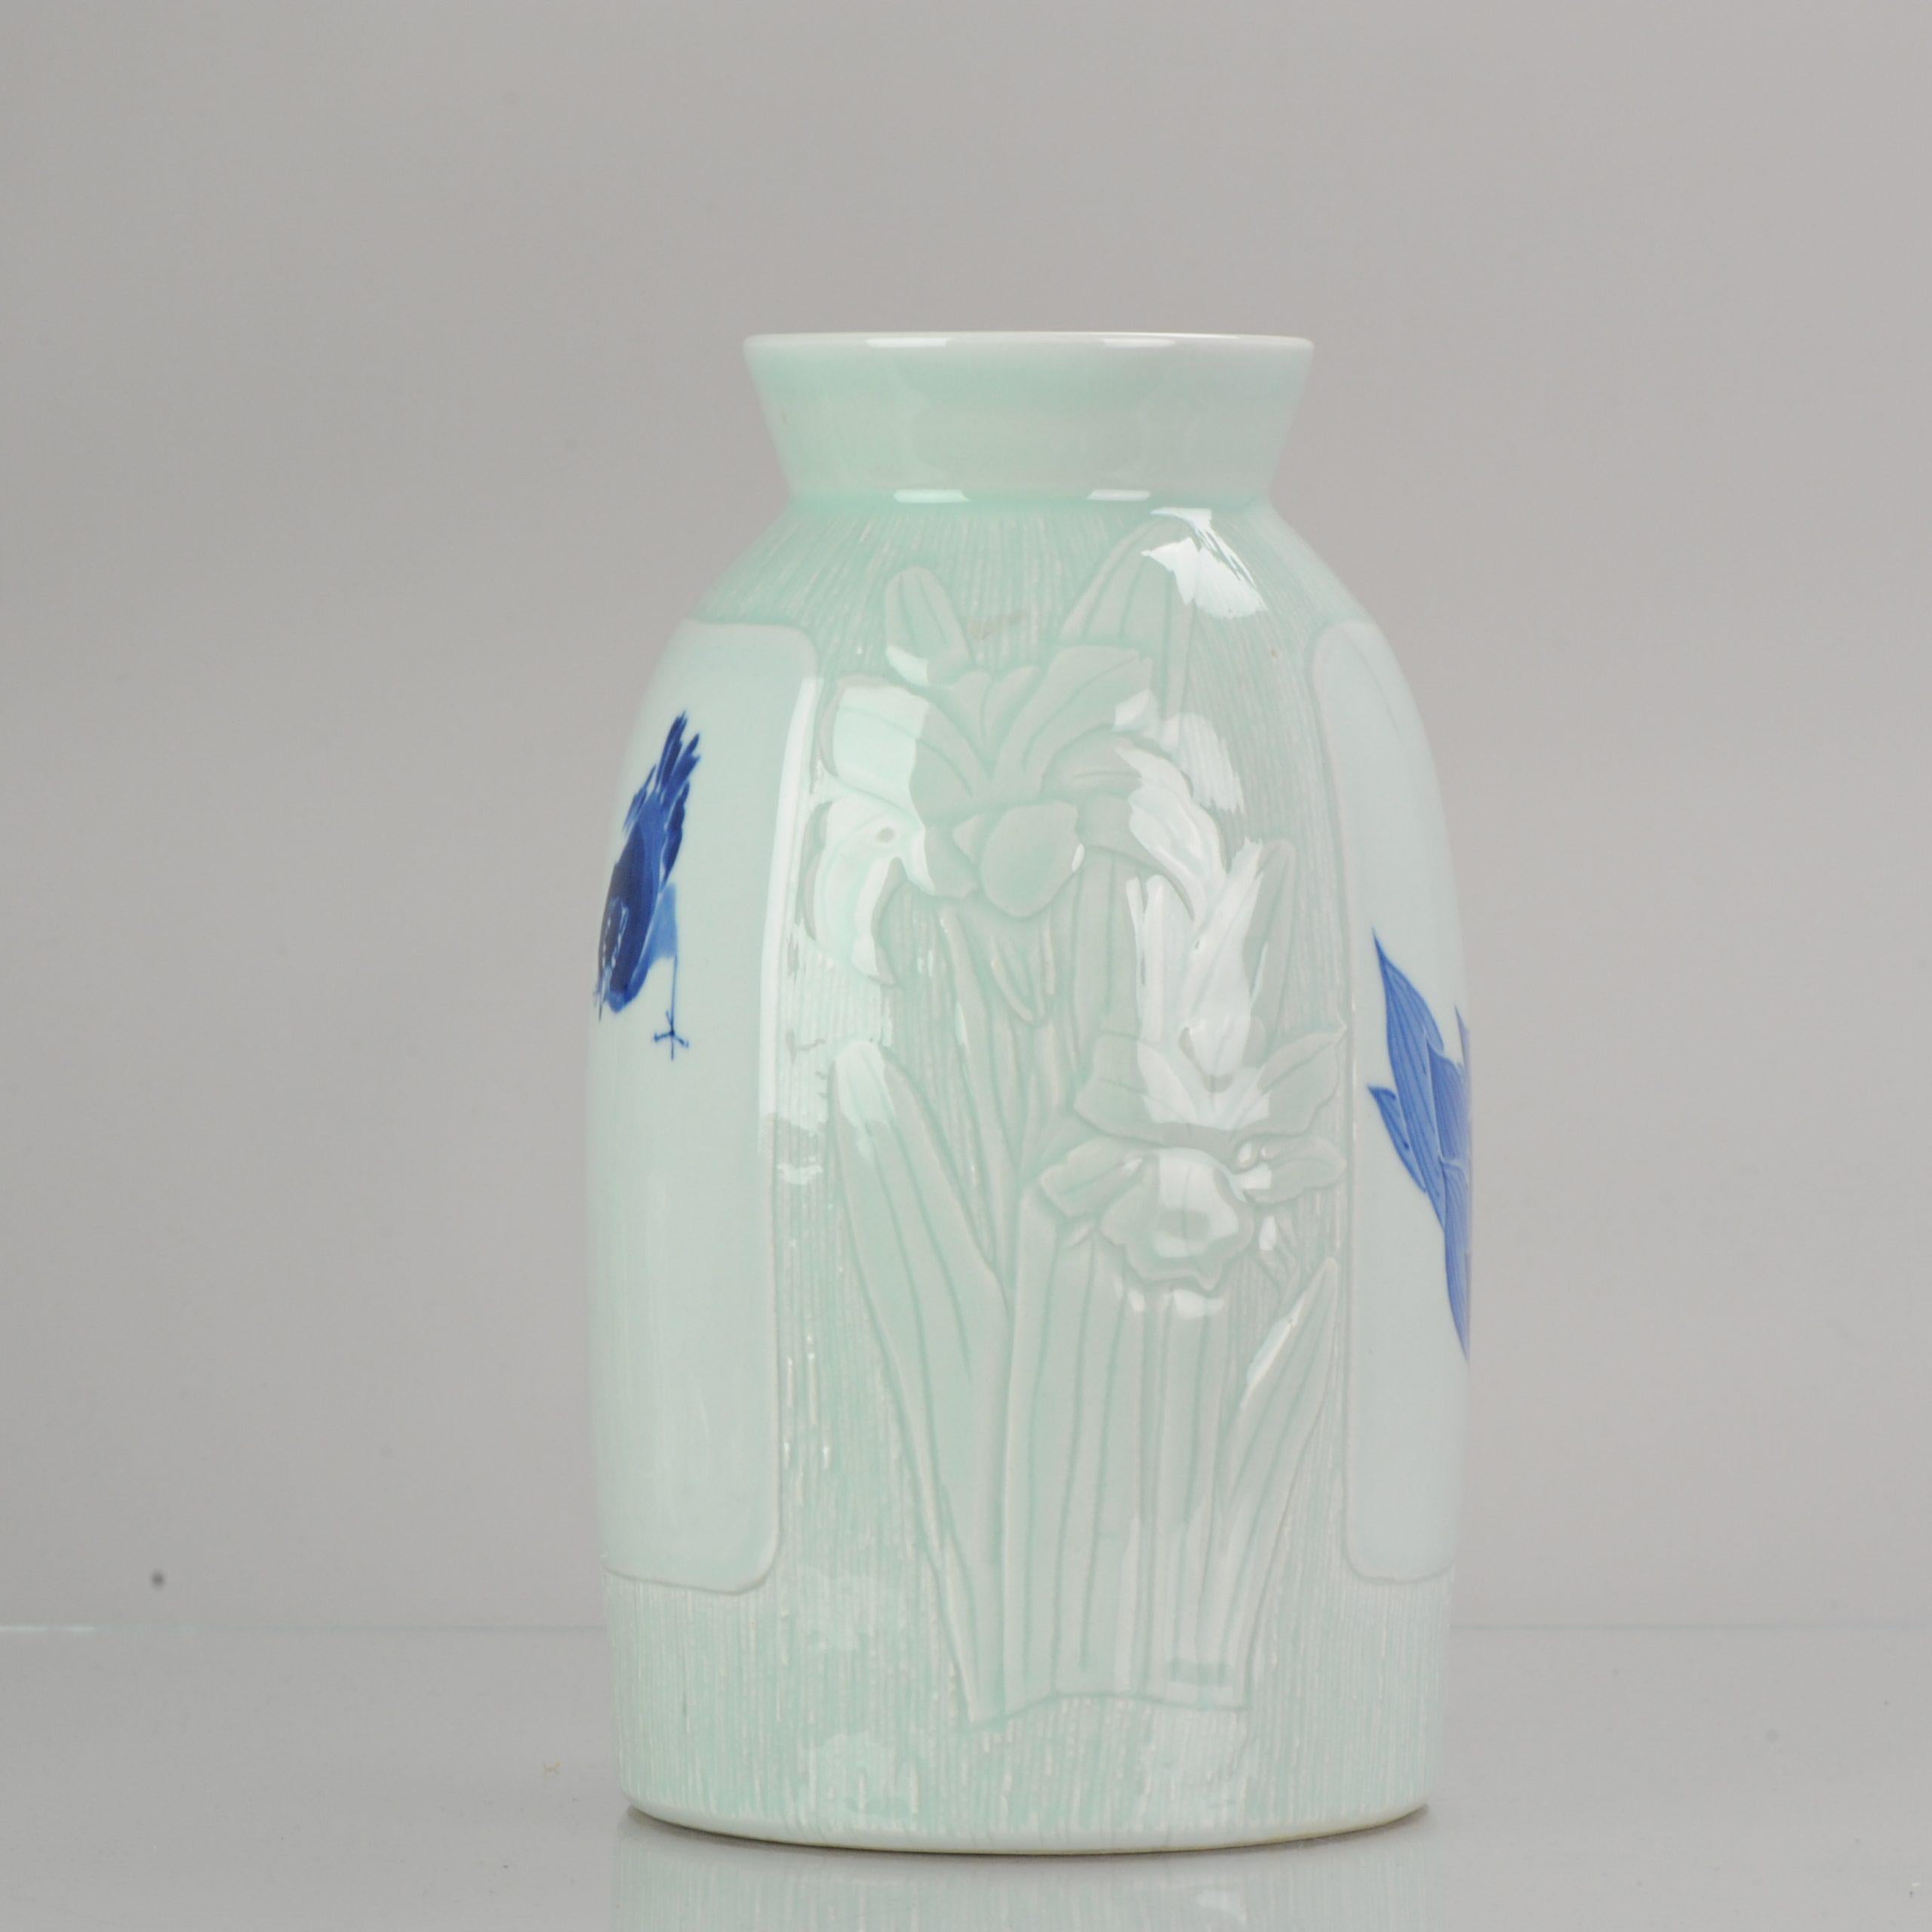 Wanglin '1972' Artist Marked Celadon Anhua Vase Dated 2001 Chinese Porcelain In Excellent Condition For Sale In Amsterdam, Noord Holland